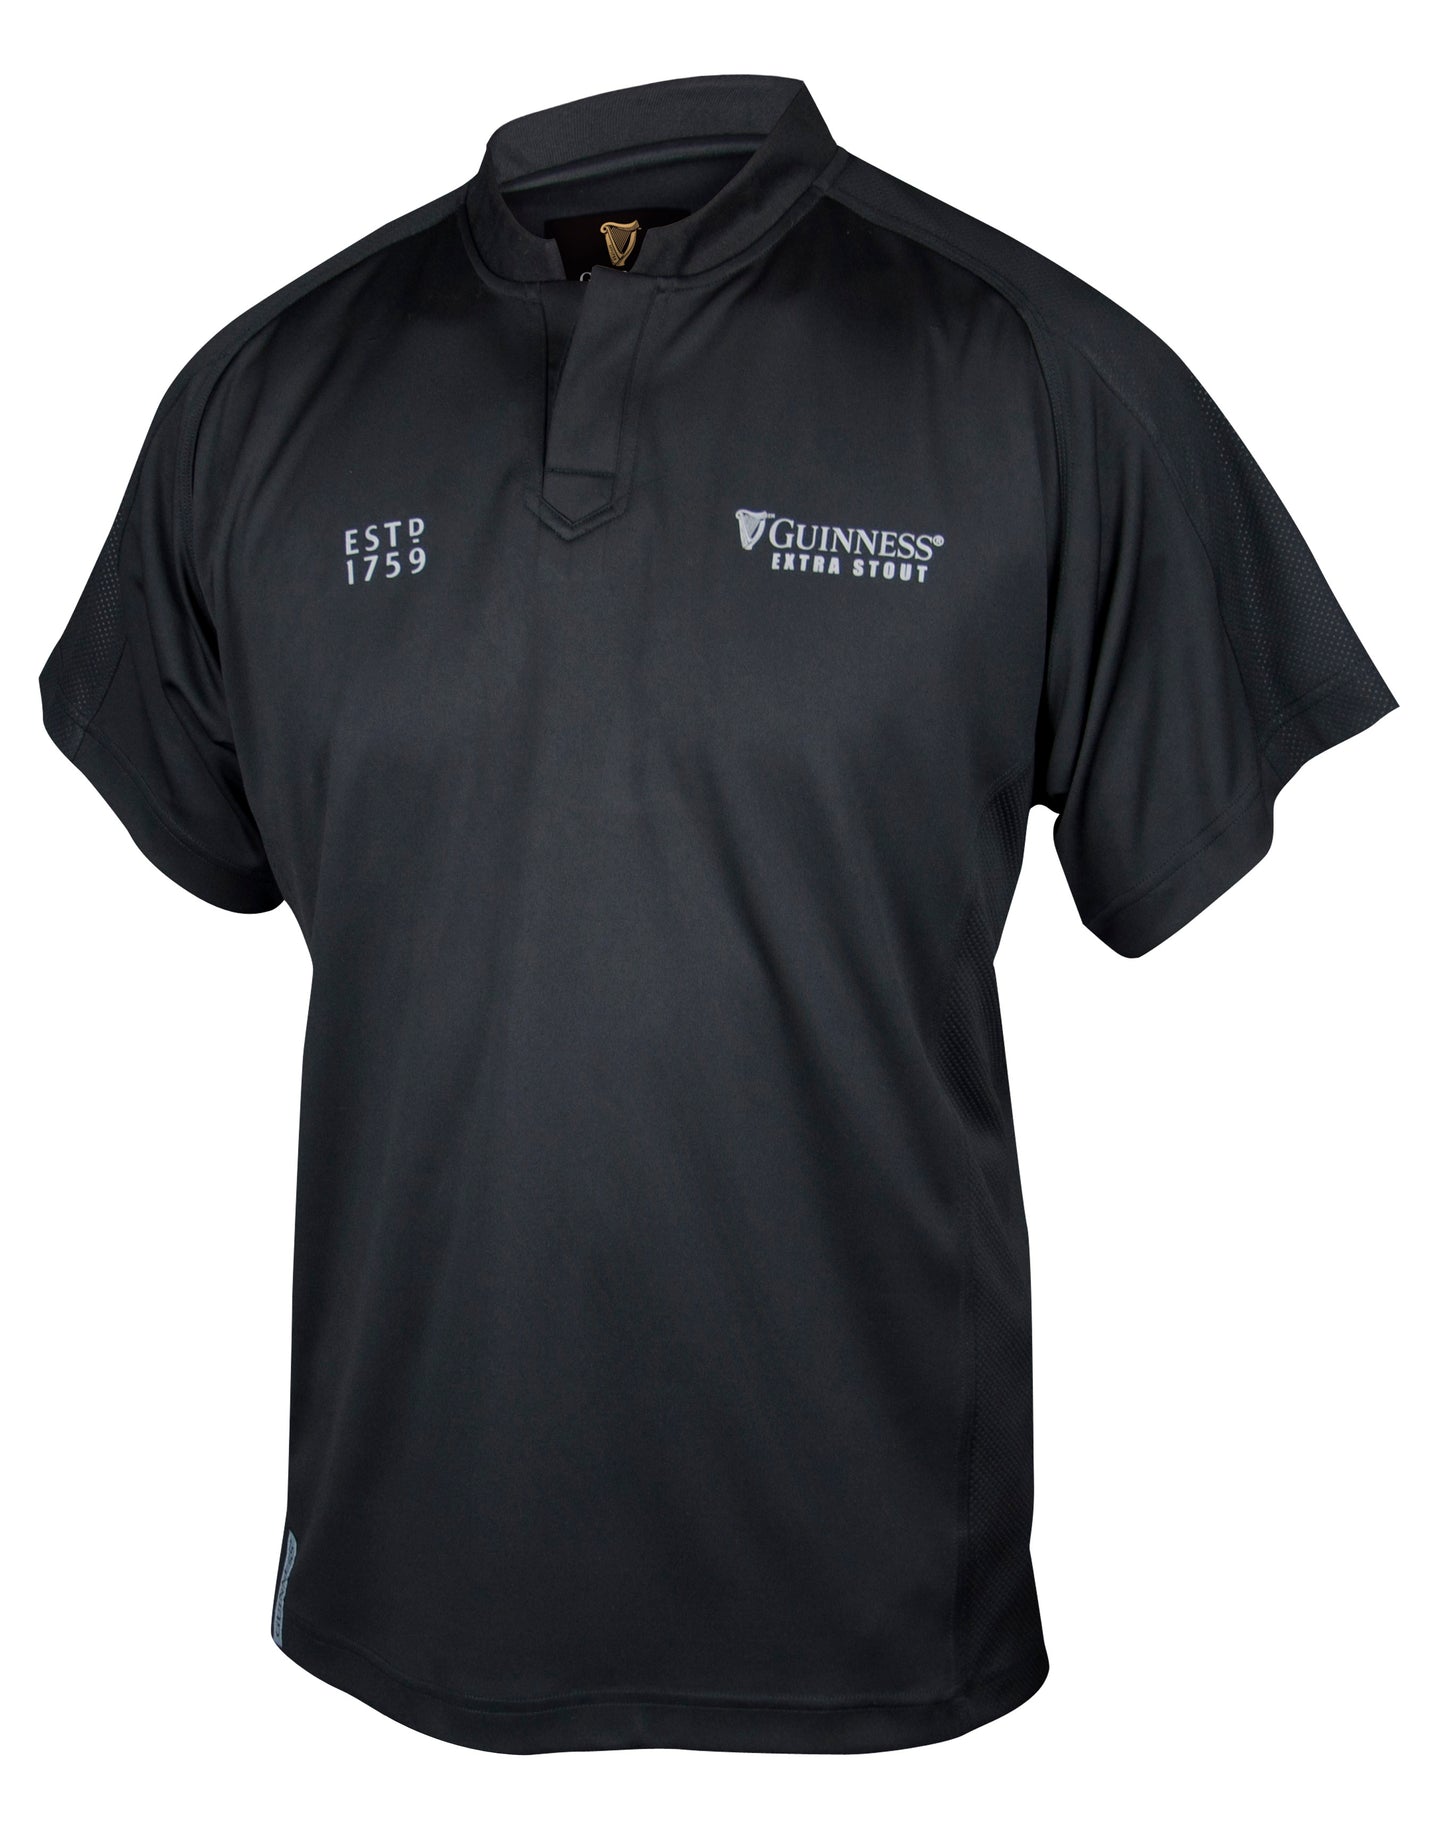 All Black Rugby Jersey